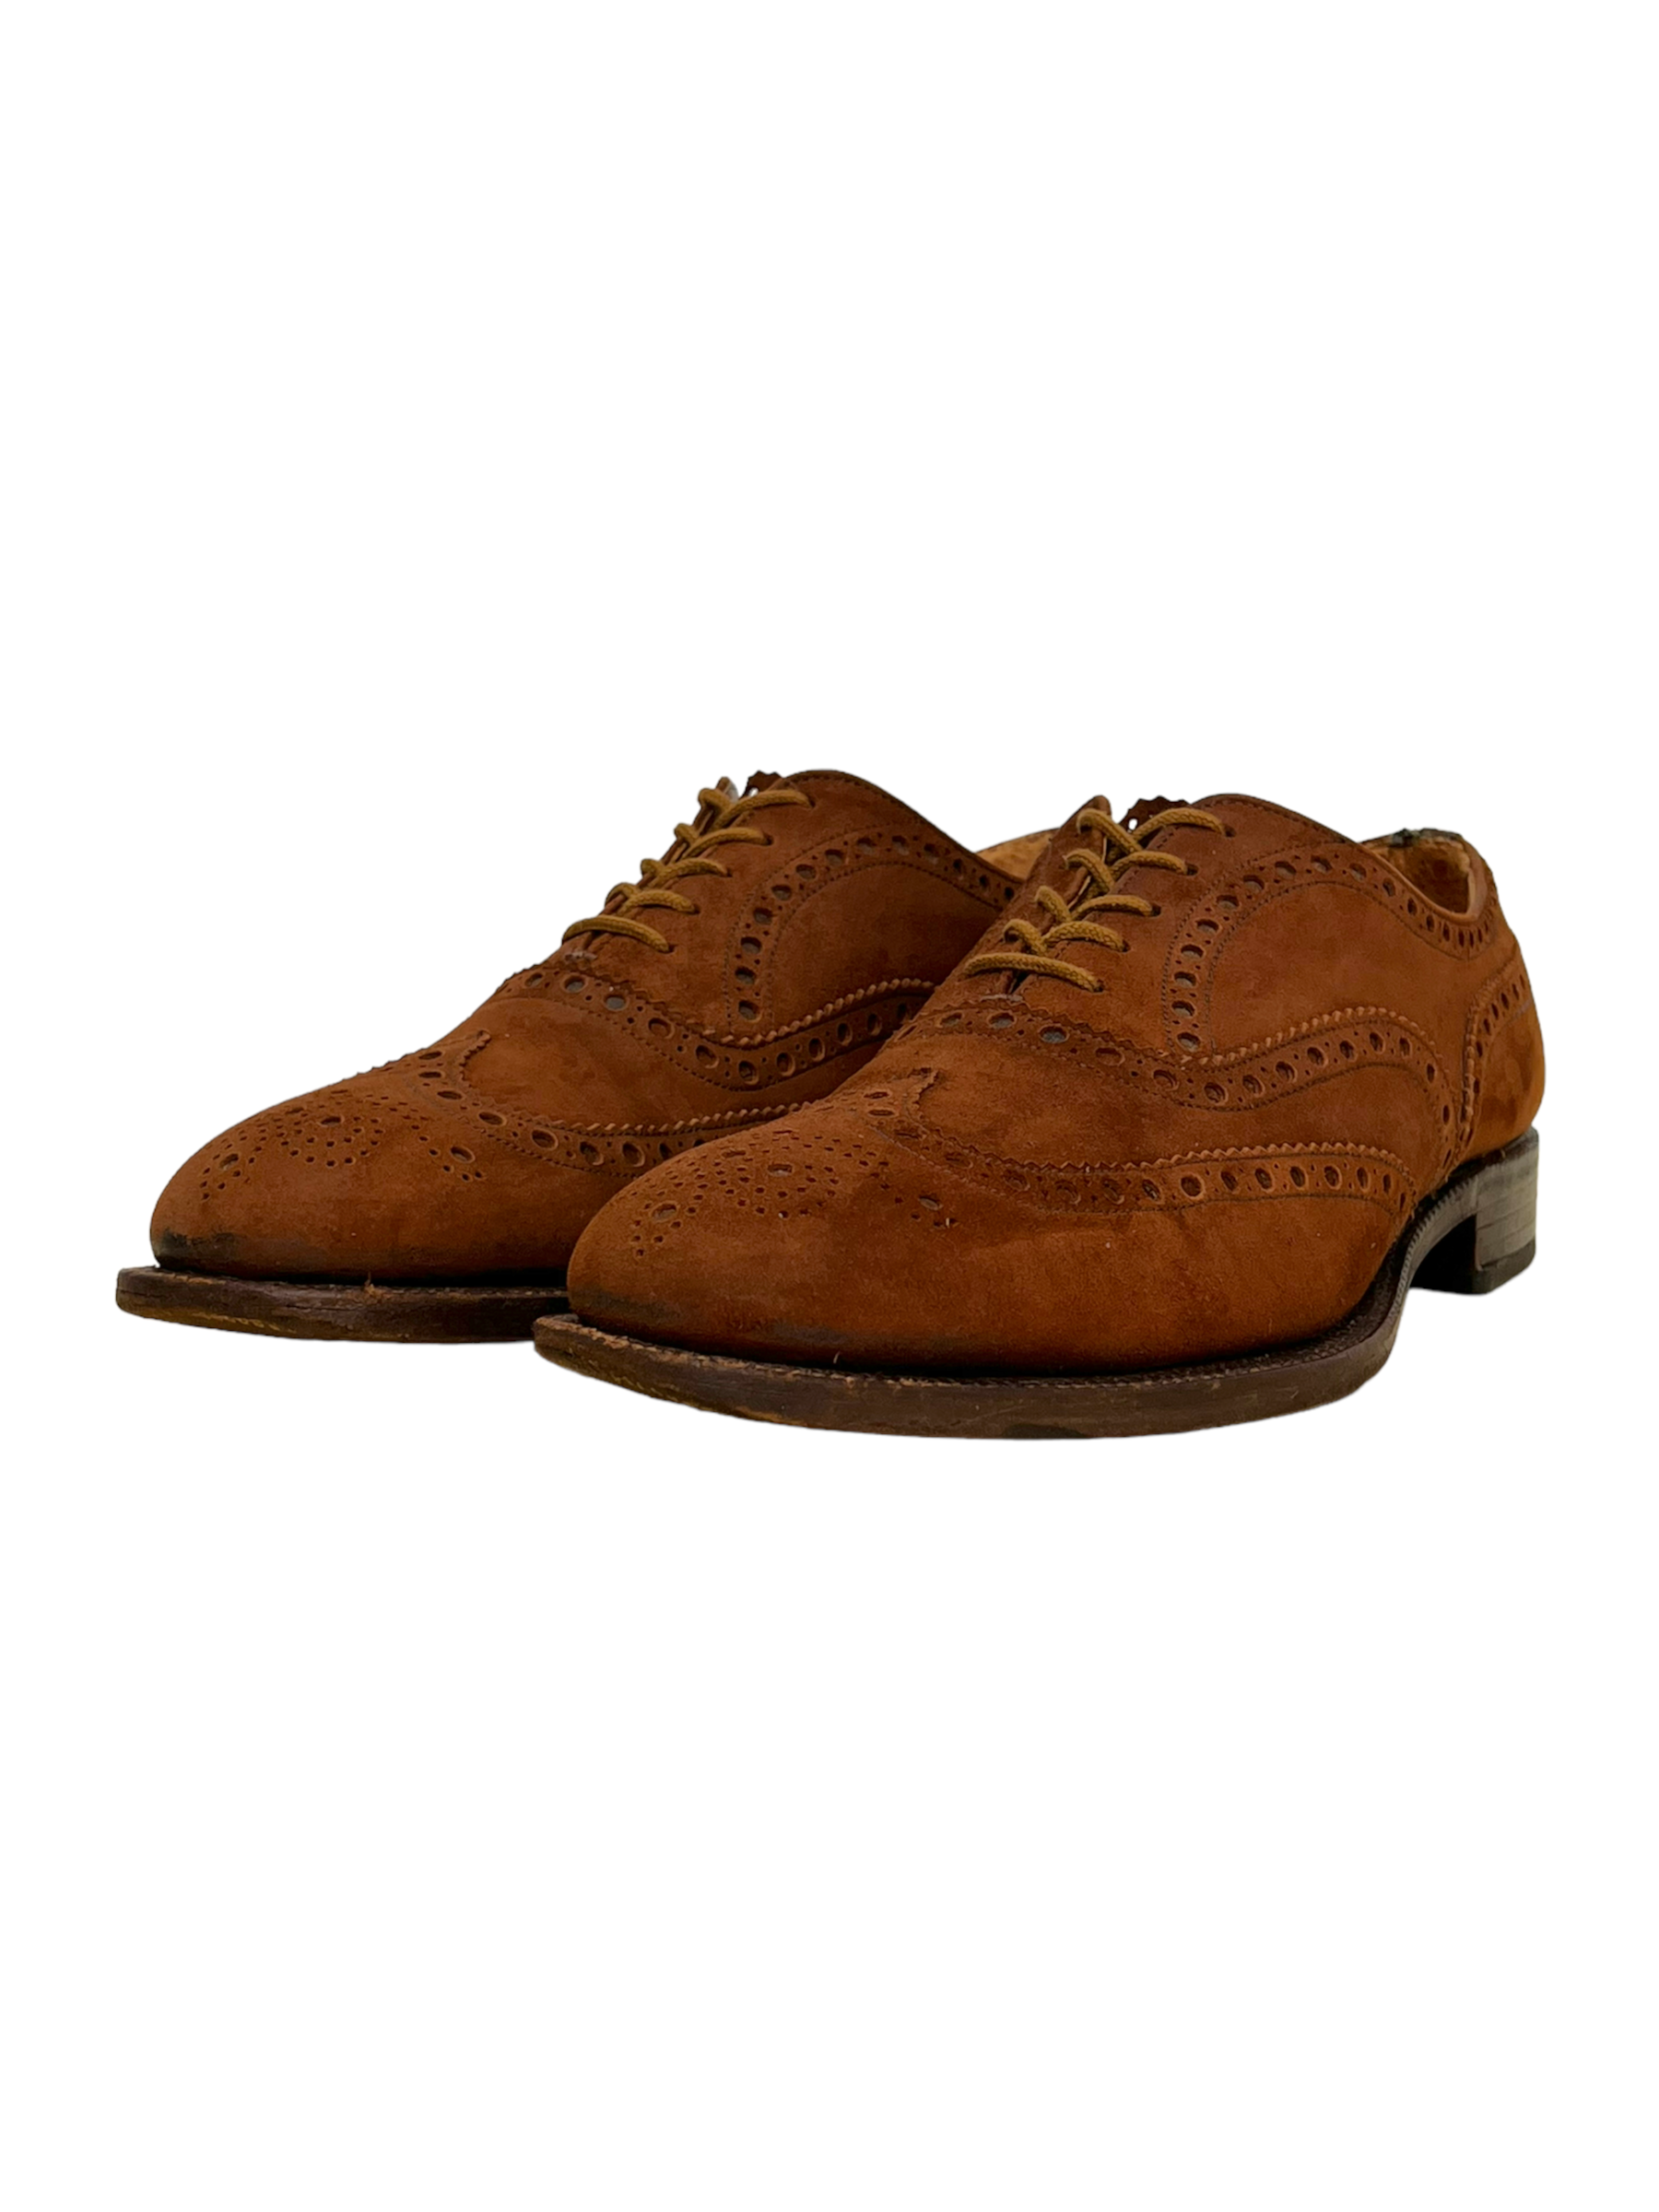 Church's Brown Suede Chetwynd Oxford Brogues Shoes - Genuine Design Luxury Consignment for Men. New & Pre-Owned Clothing, Shoes, & Accessories. Calgary, Canada